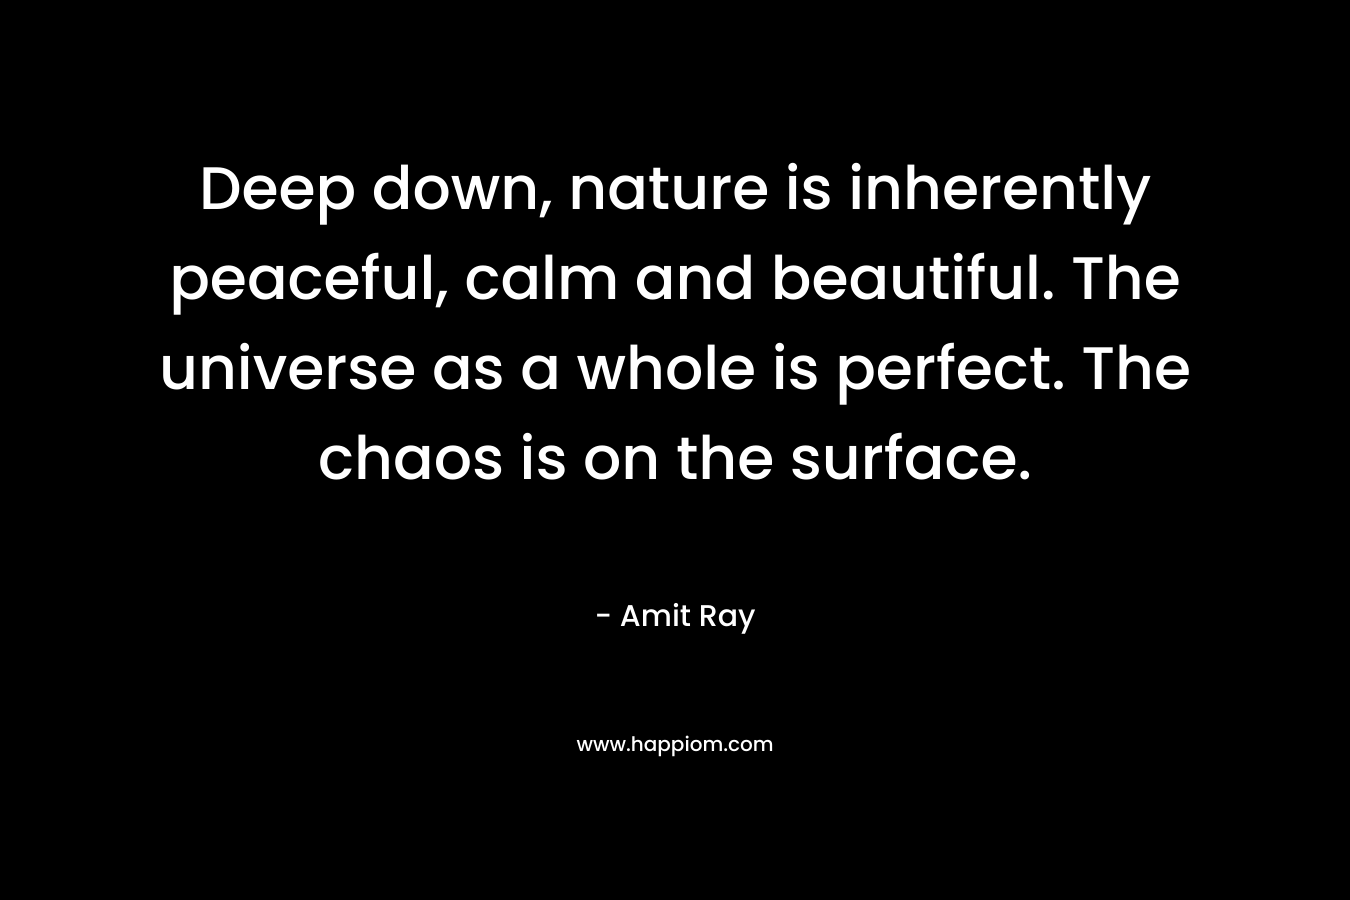 Deep down, nature is inherently peaceful, calm and beautiful. The universe as a whole is perfect. The chaos is on the surface.